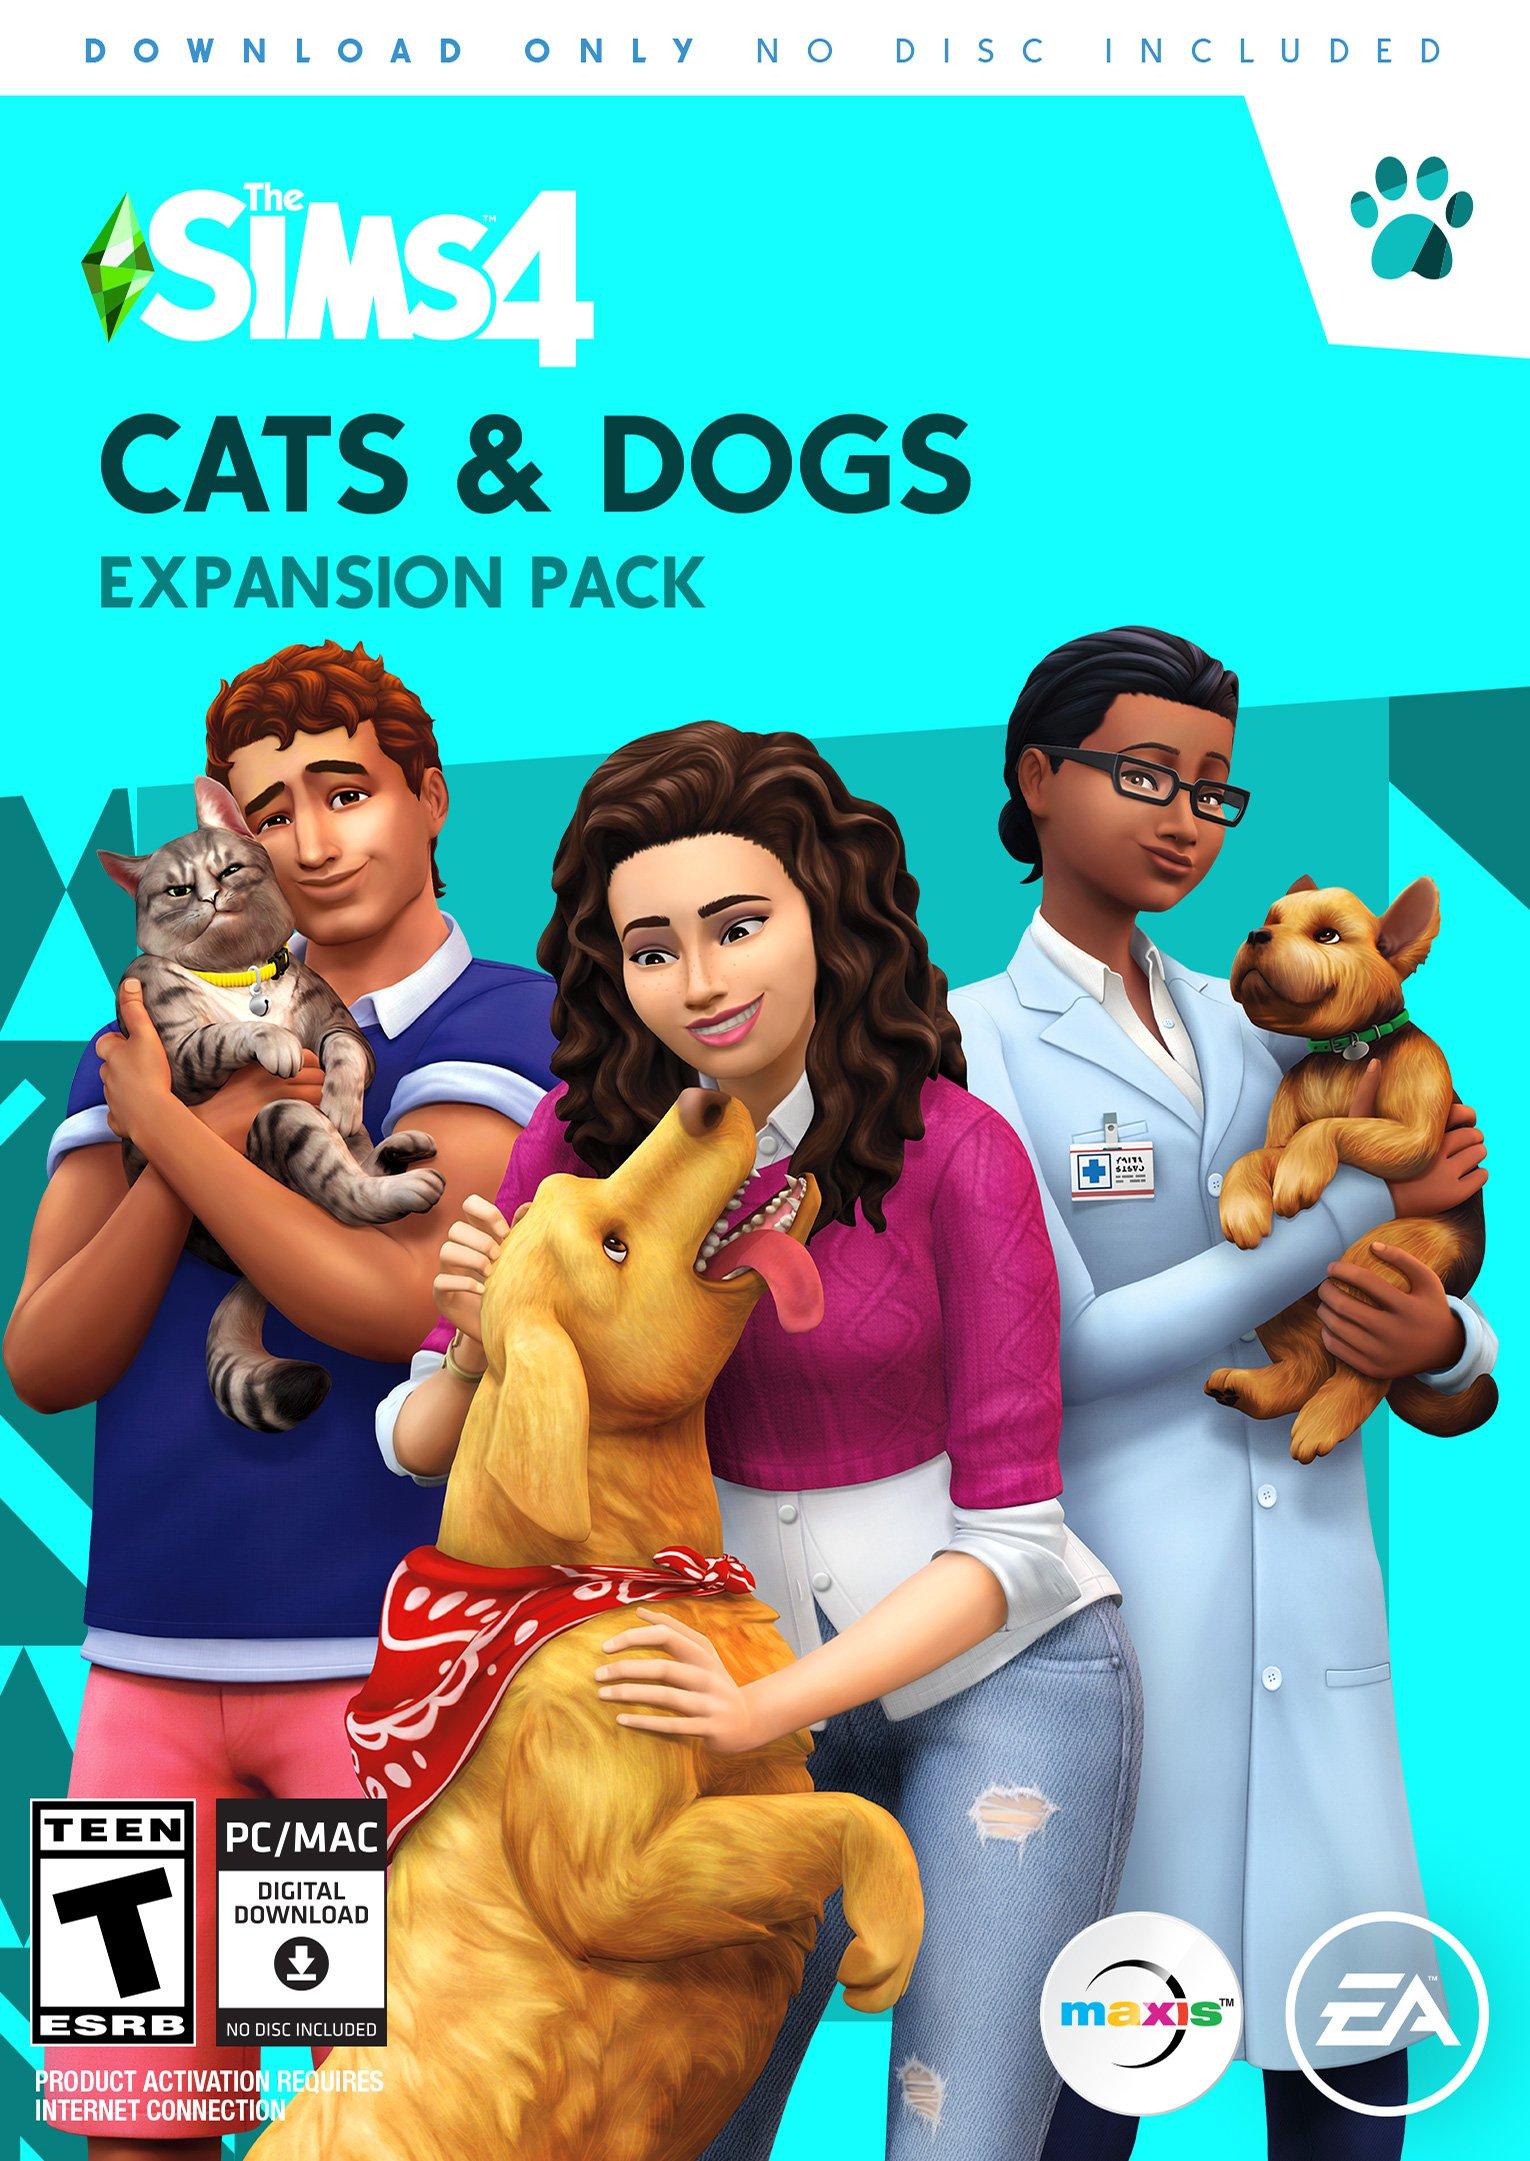 The Sims 4: Cats and Dogs DLC